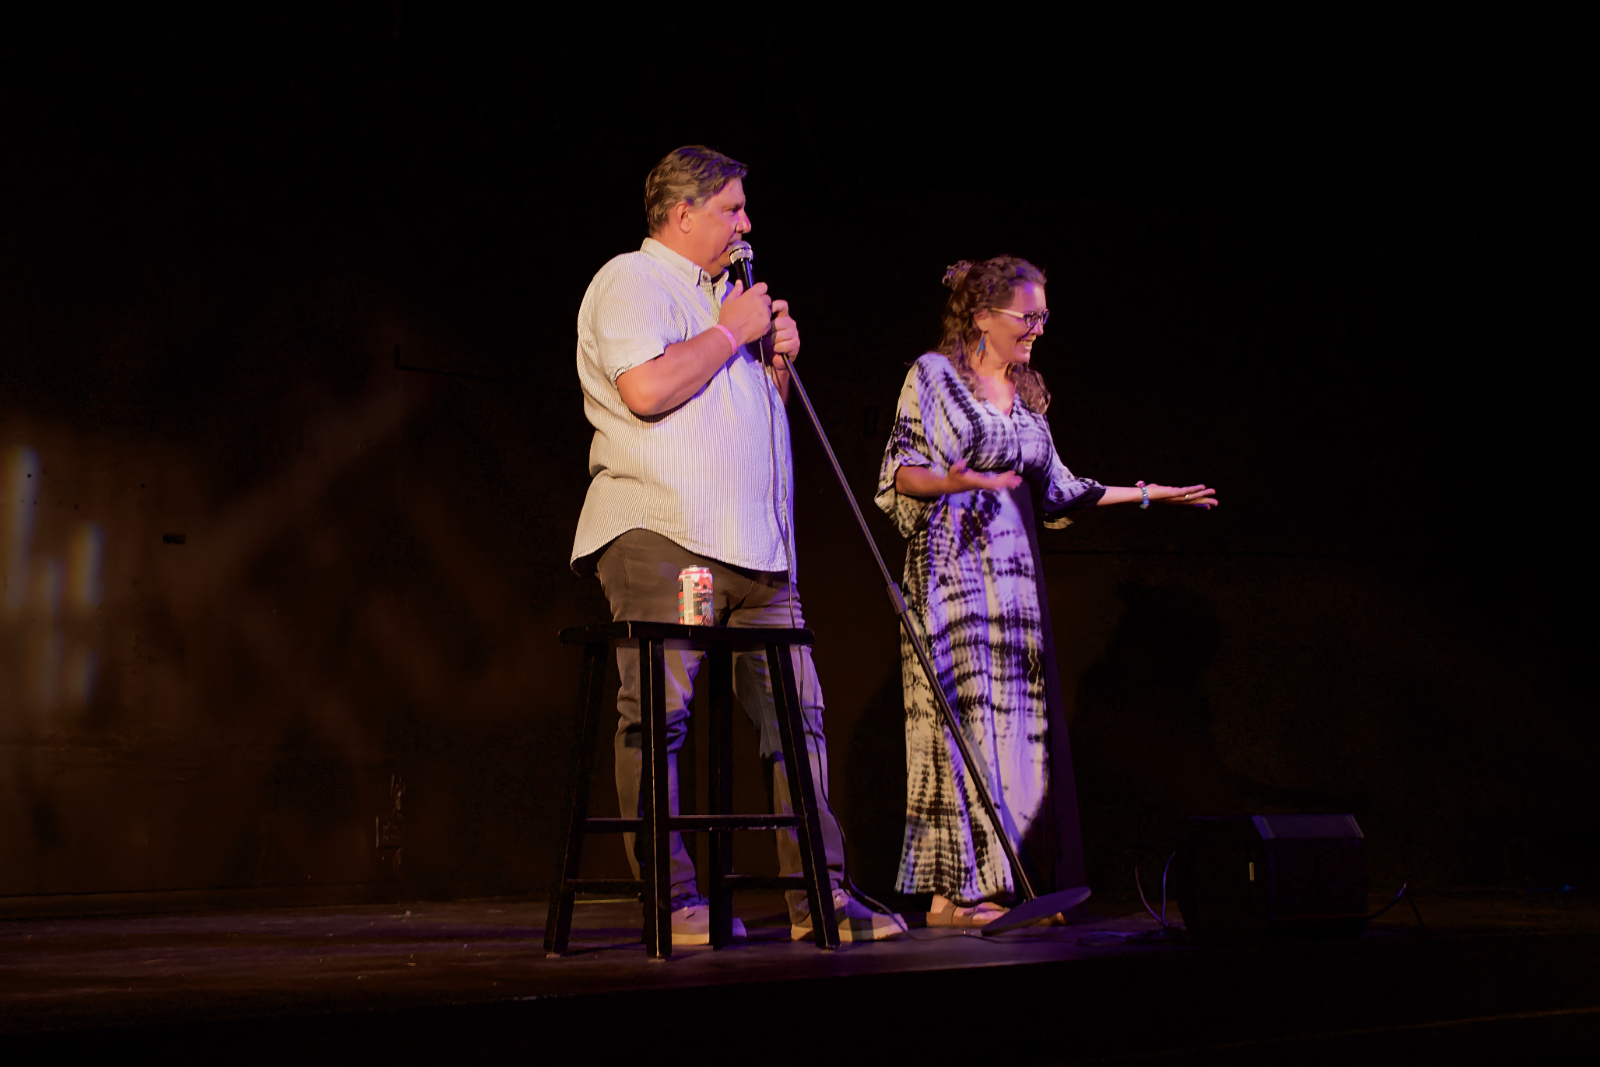 Greg Smrdel and Ami Hill of the Outer Banks Laughing Gull Comedy Club